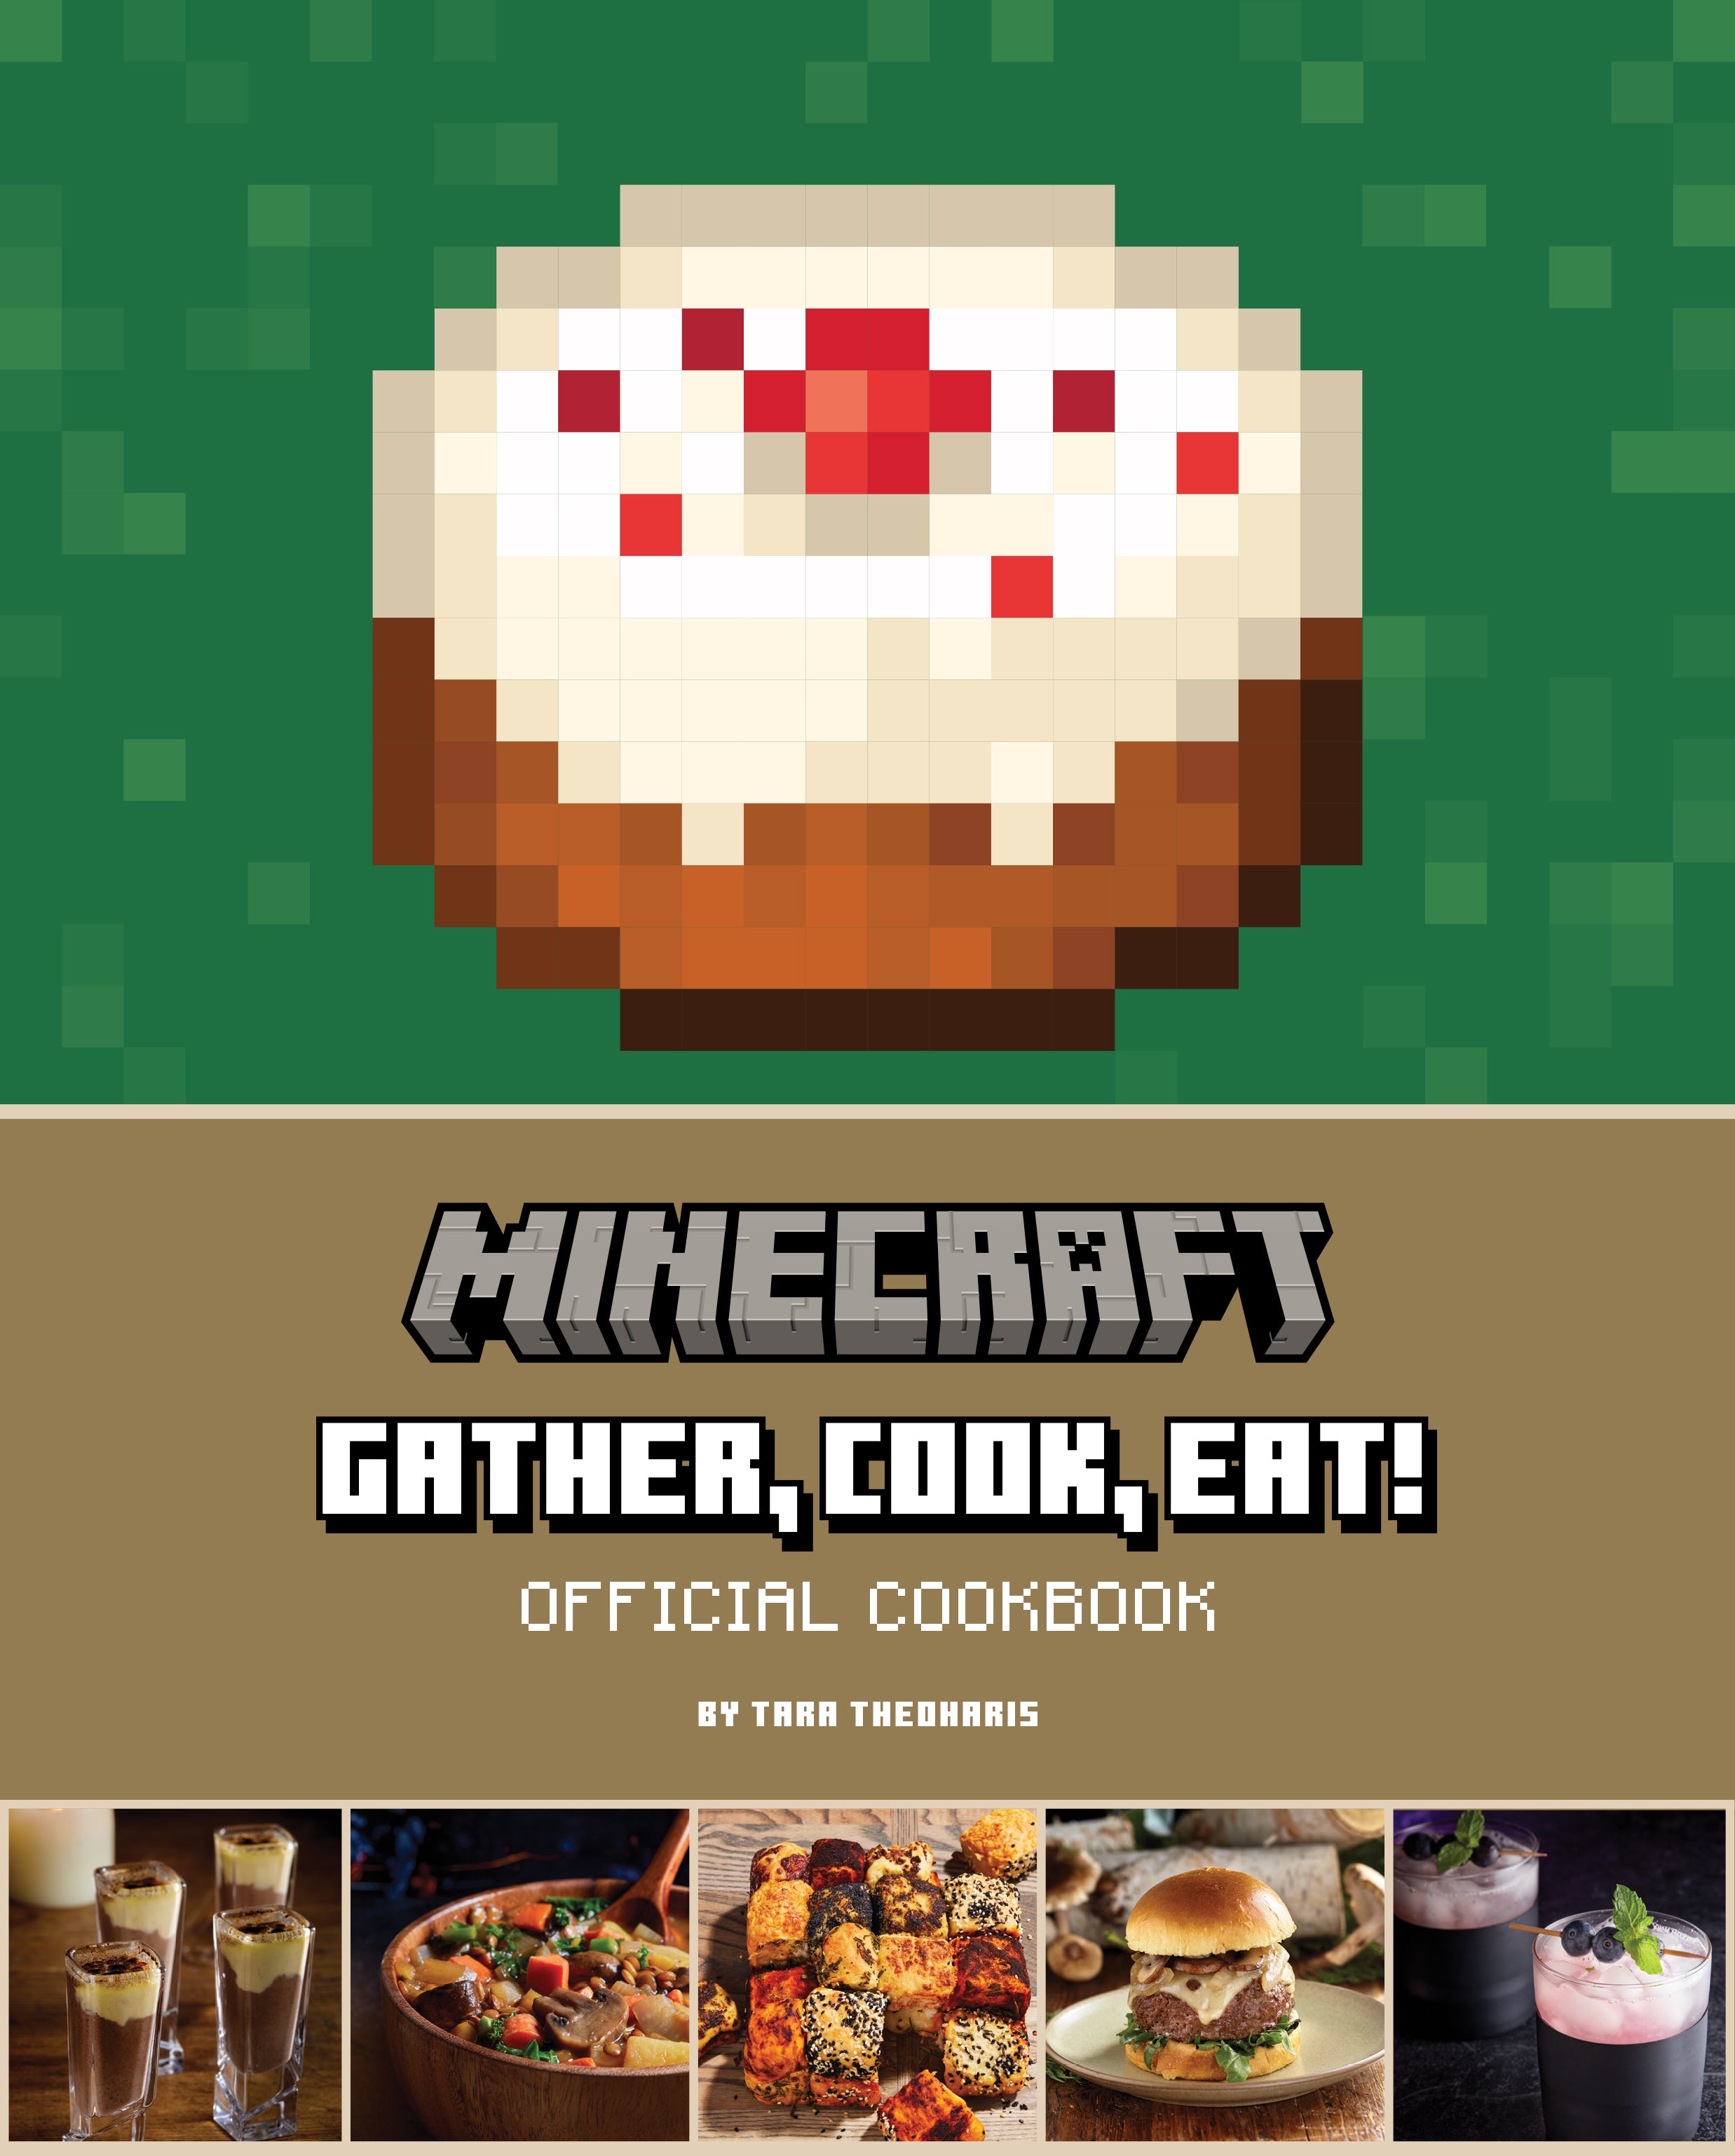 how to make a pie in minecraft